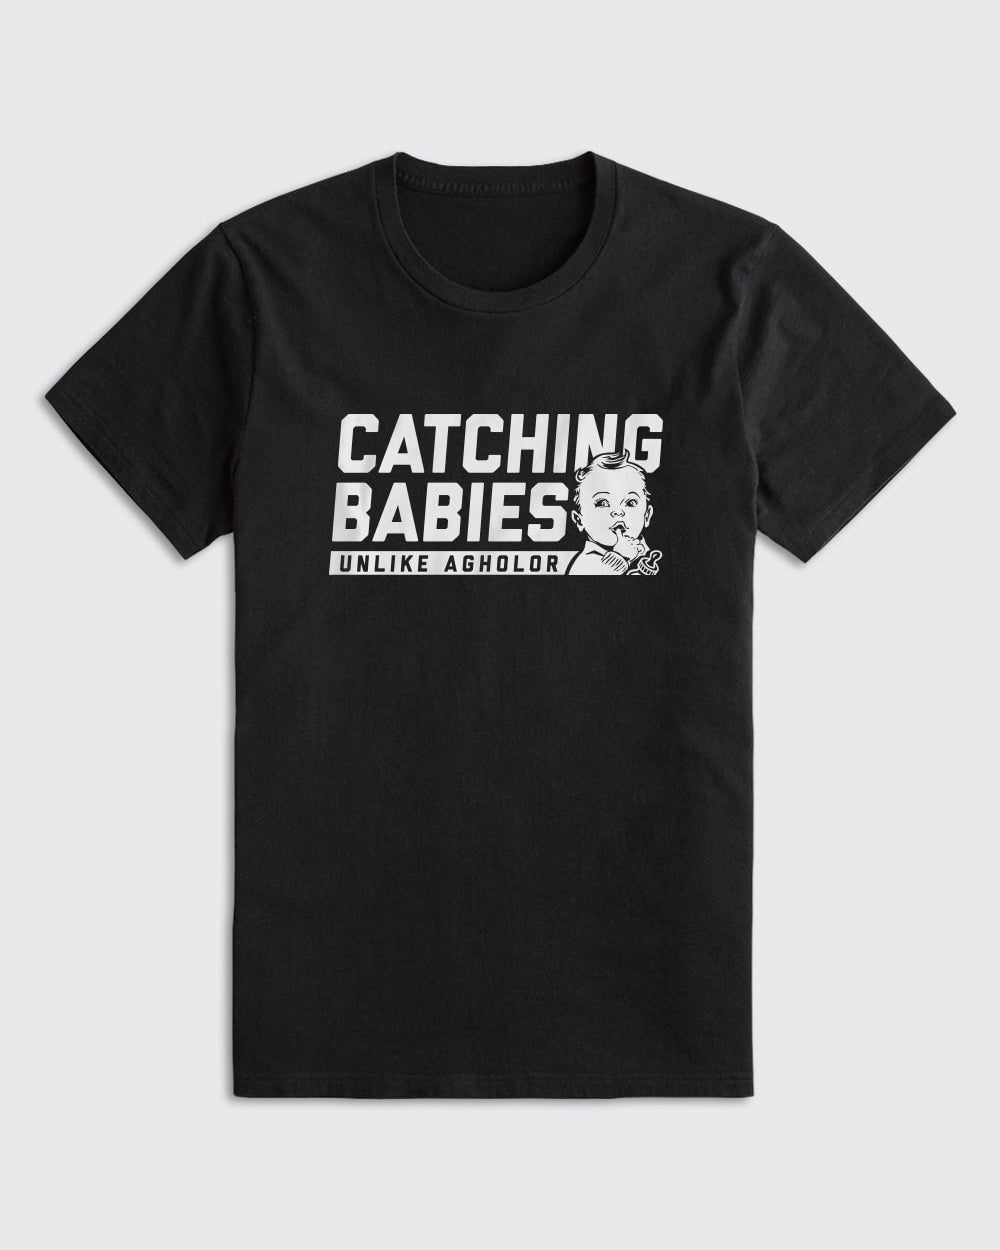 Catching Babies Unlike Agholor Shirt - Eagles, T-Shirts - Philly Sports Shirts